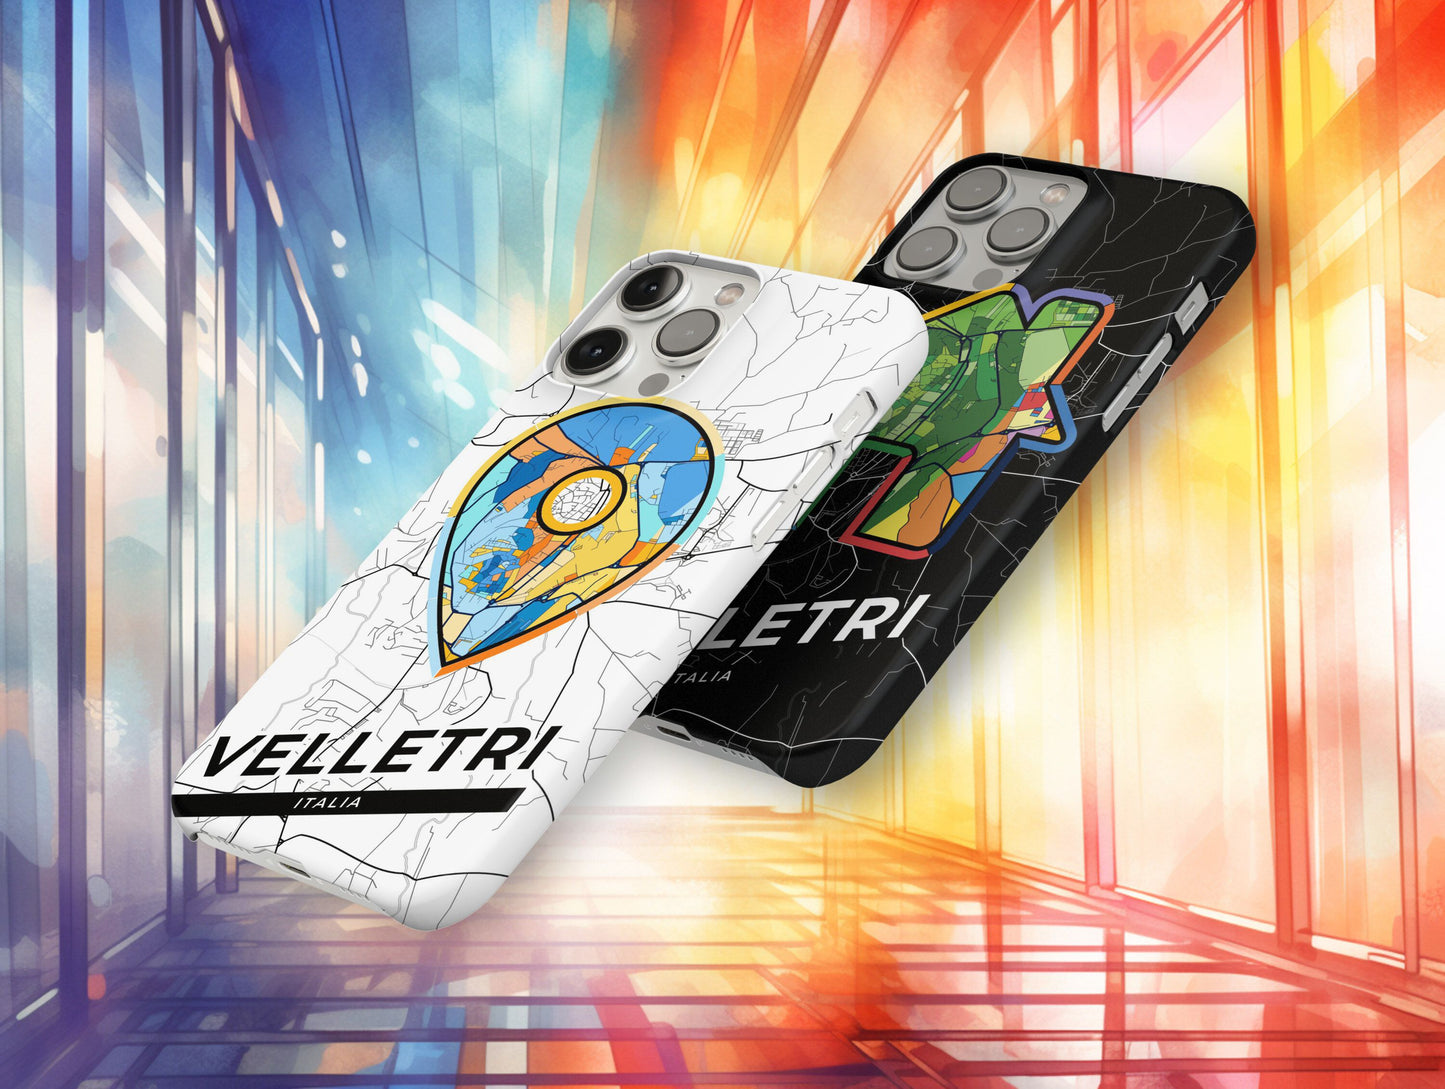 Velletri Italy slim phone case with colorful icon